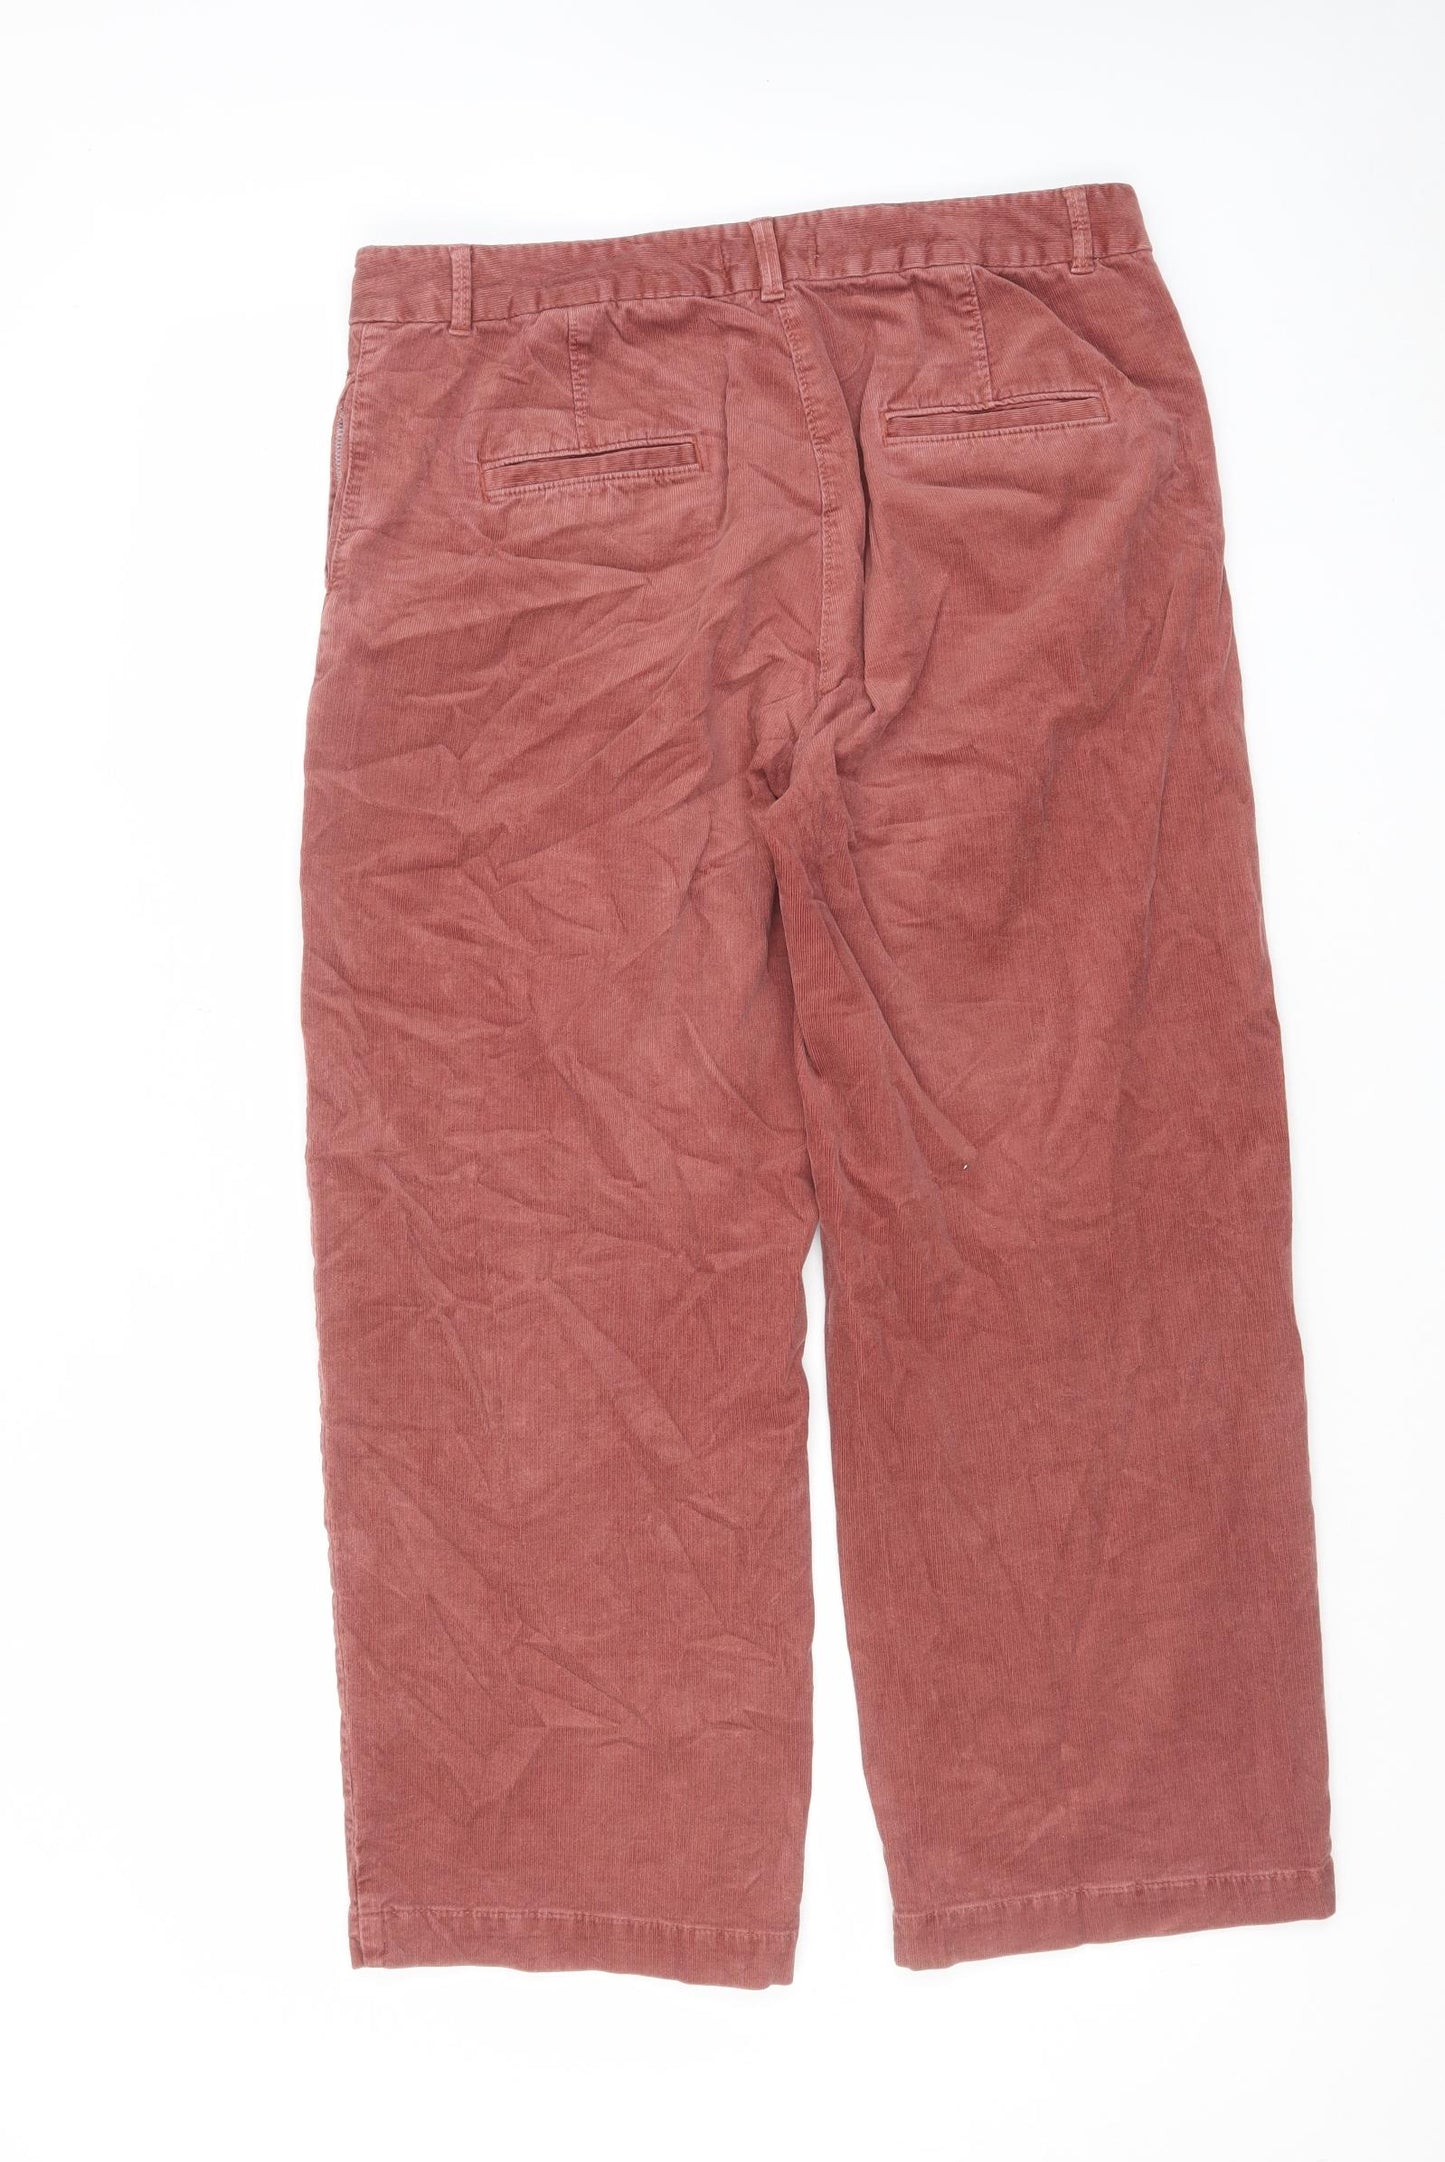 Marks and Spencer Womens Pink Cotton Trousers Size 16 L27 in Regular Zip